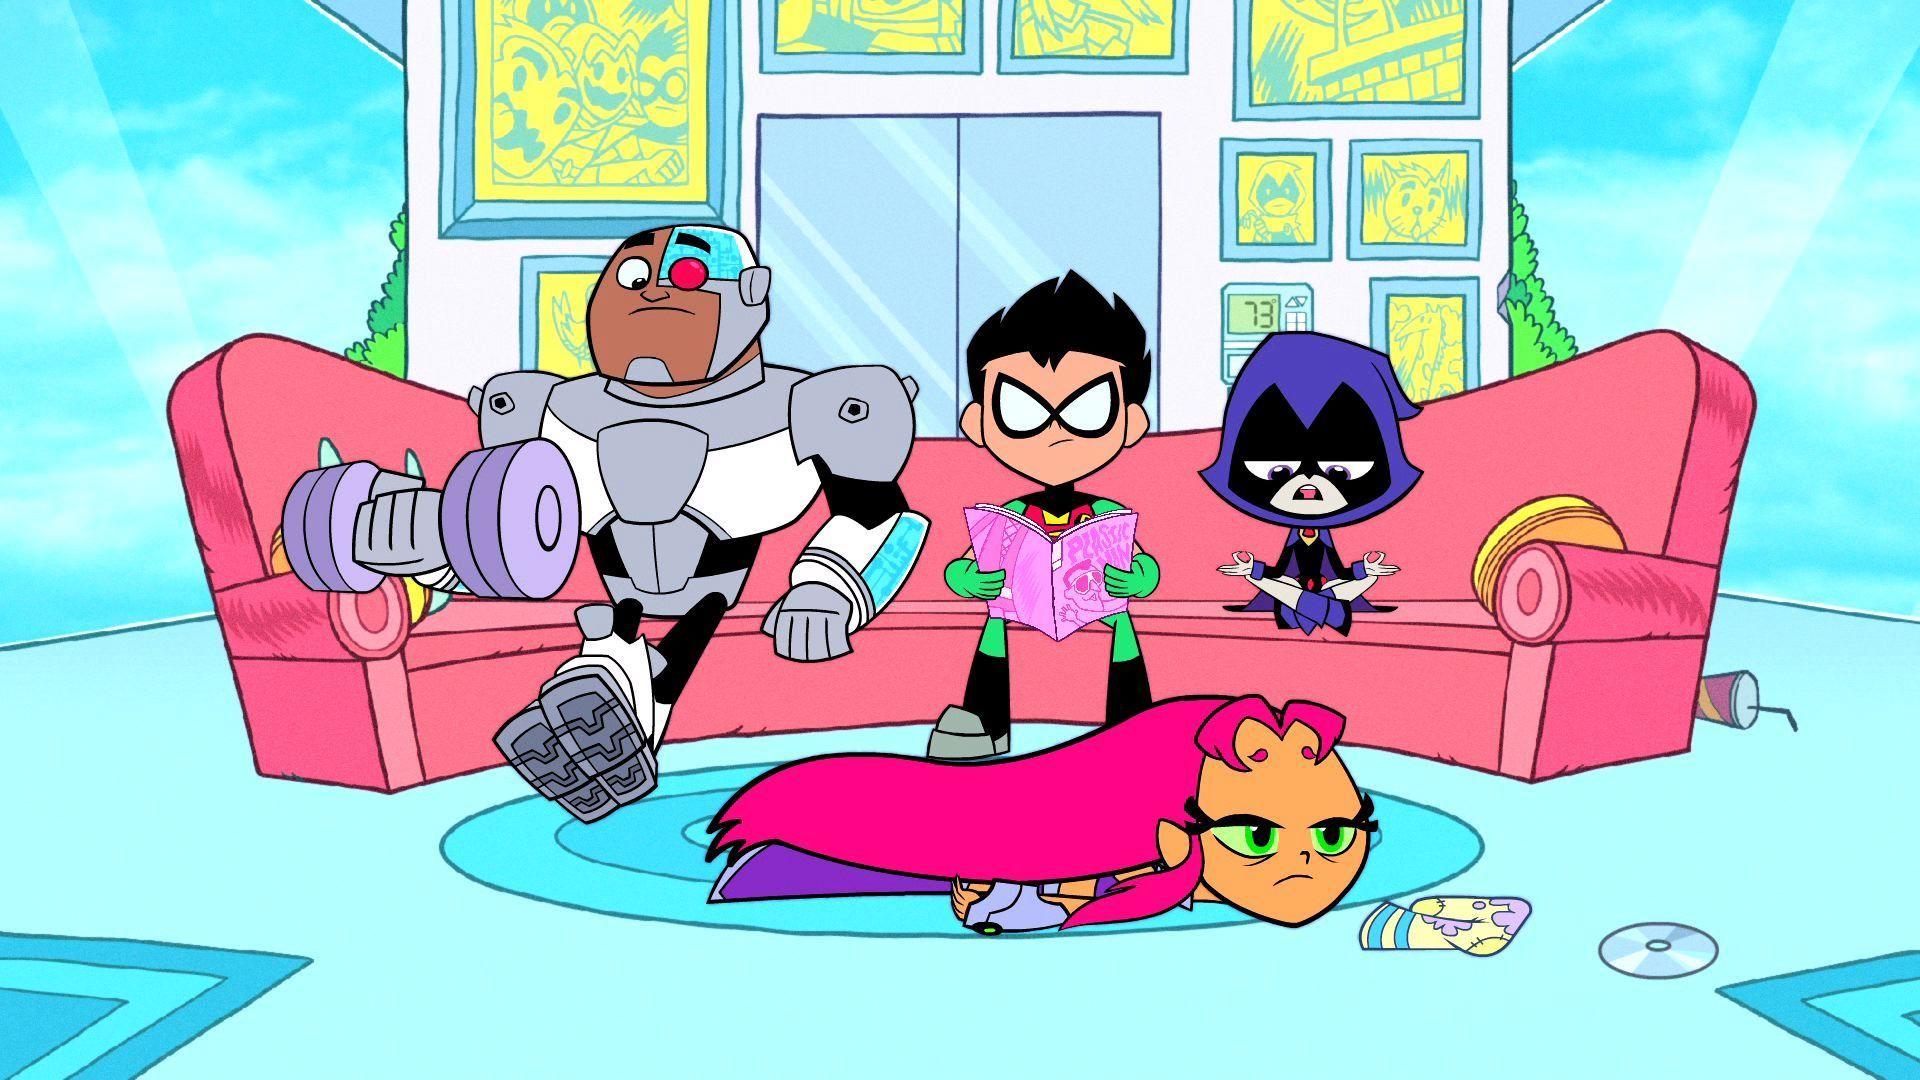 Teen Titans Go! Episode 5 &;Ghost Boy&; Clip and Image